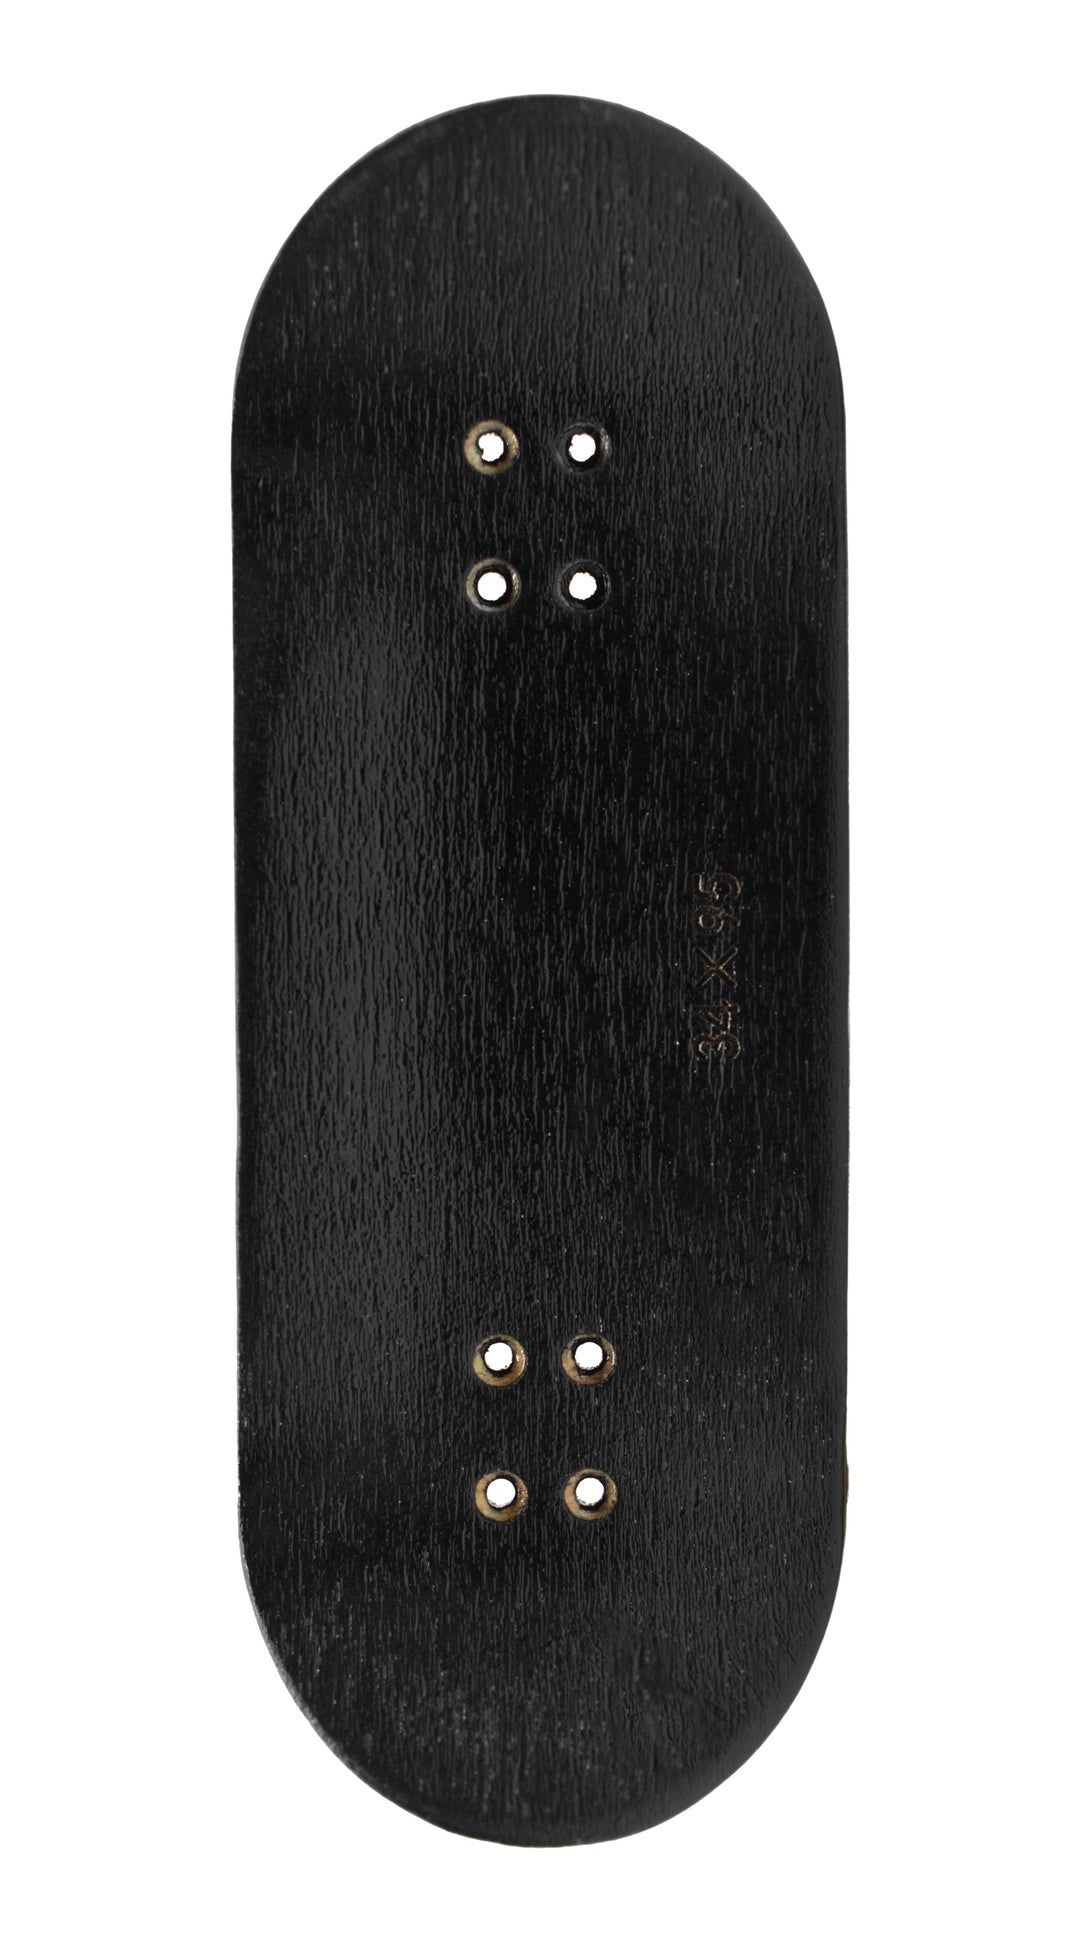 Teak Tuning PROlific Wooden 5 Ply Fingerboard Deck 34x95mm - Black Mamba - with Color Matching Mid Ply